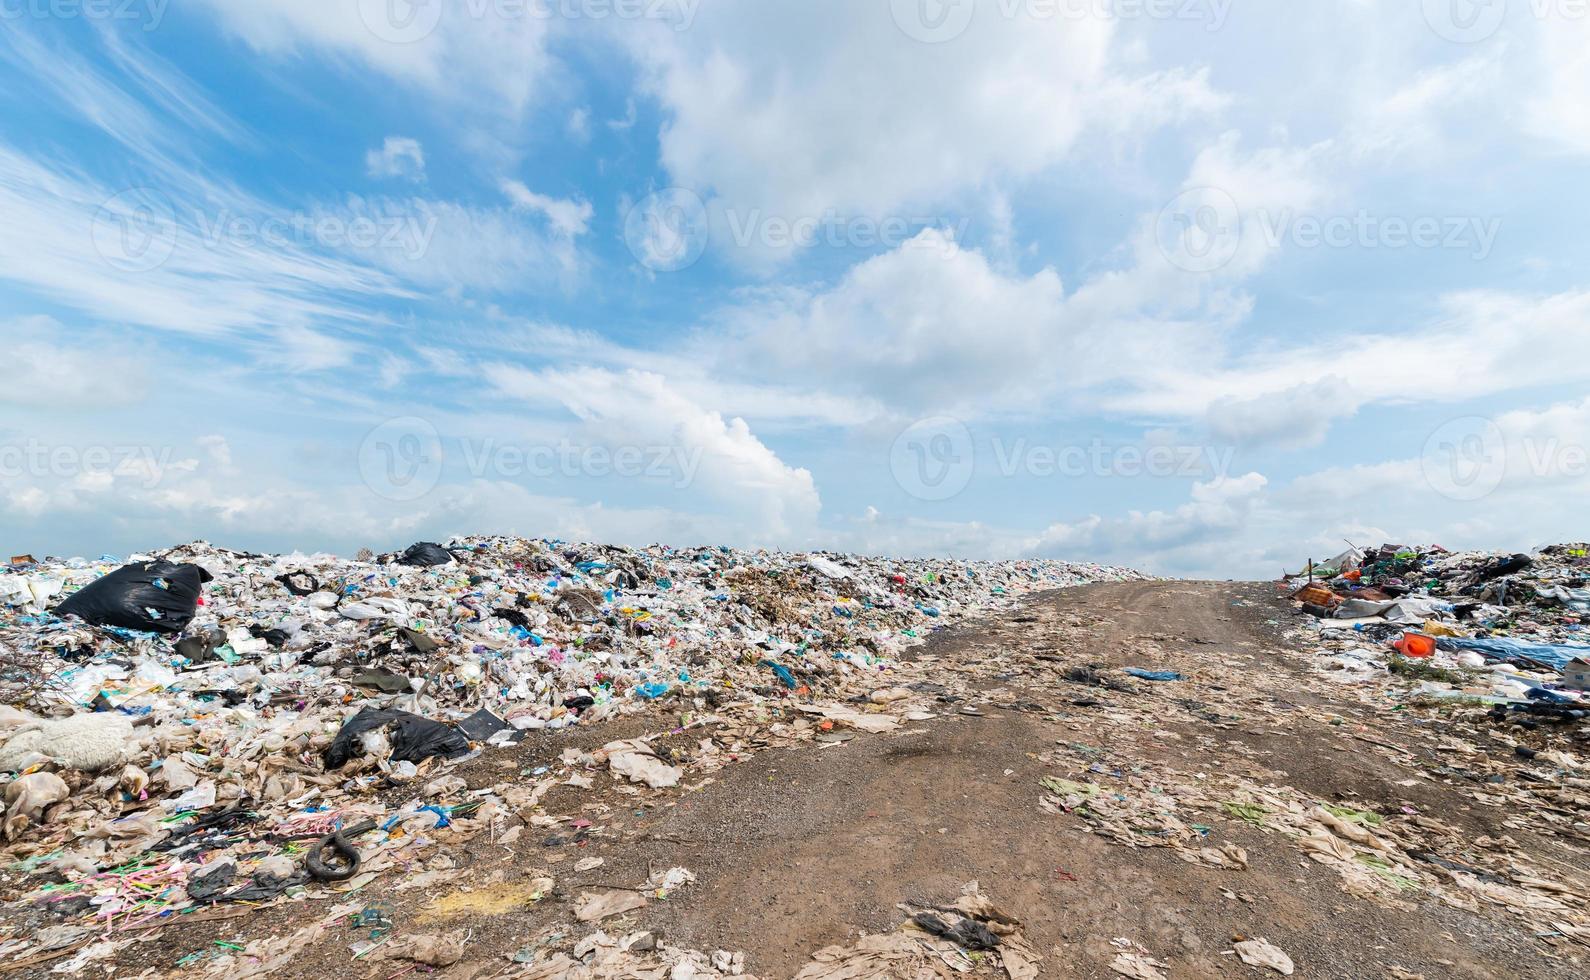 garbage in Municipal landfill for household waste photo